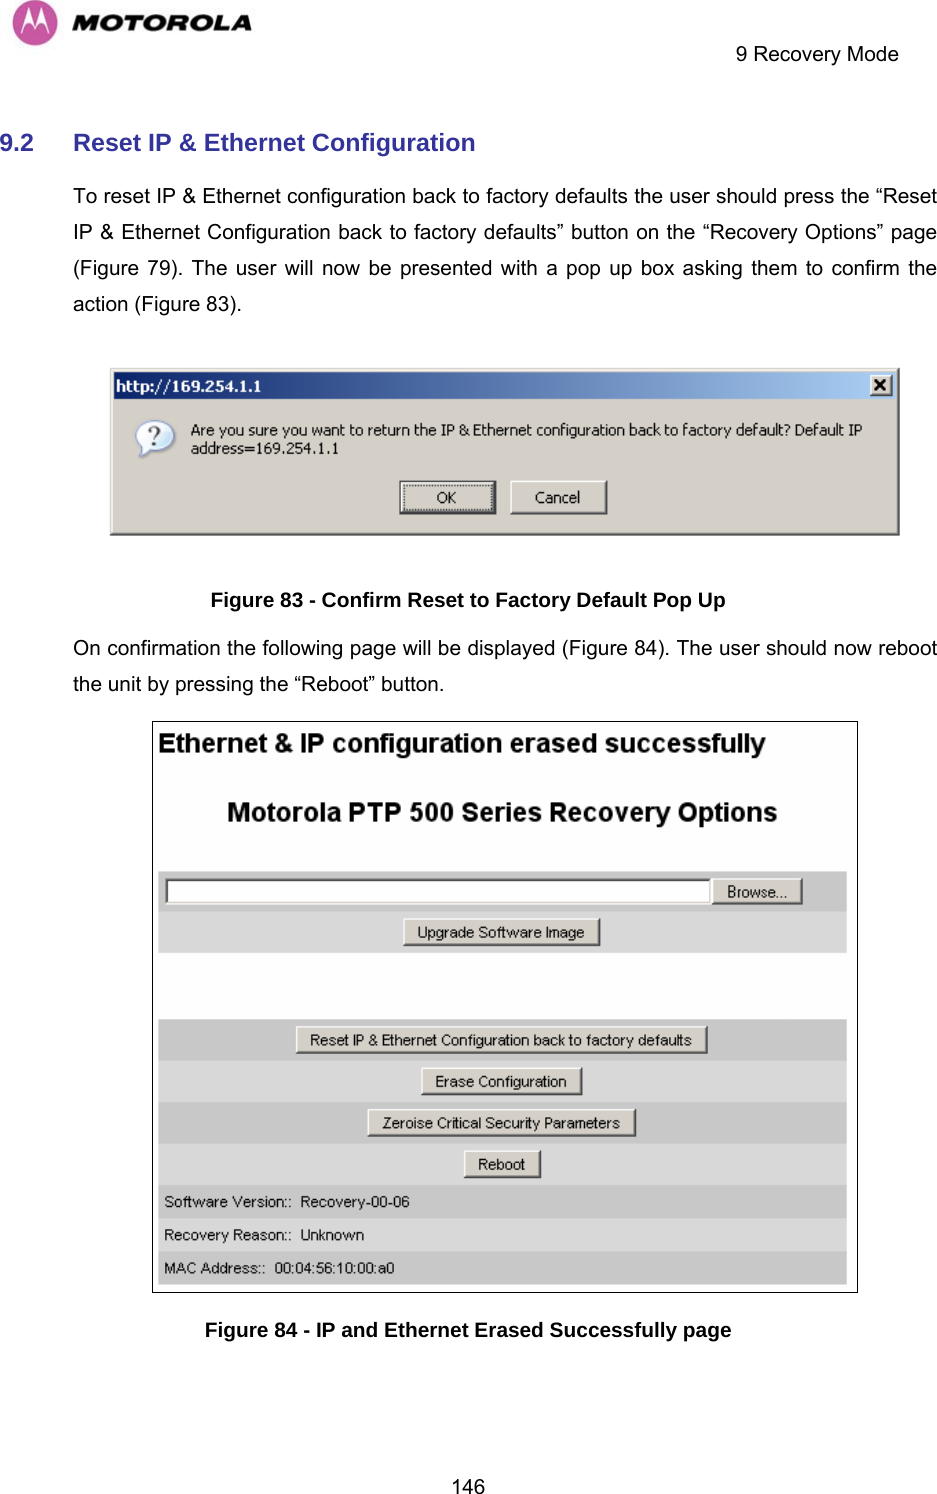     9 Recovery Mode  1469.2  Reset IP &amp; Ethernet Configuration To reset IP &amp; Ethernet configuration back to factory defaults the user should press the “Reset IP &amp; Ethernet Configuration back to factory defaults” button on the “Recovery Options” page (Figure 79). The user will now be presented with a pop up box asking them to confirm the action (Figure 83).  Figure 83 - Confirm Reset to Factory Default Pop Up On confirmation the following page will be displayed (Figure 84). The user should now reboot the unit by pressing the “Reboot” button.  Figure 84 - IP and Ethernet Erased Successfully page 